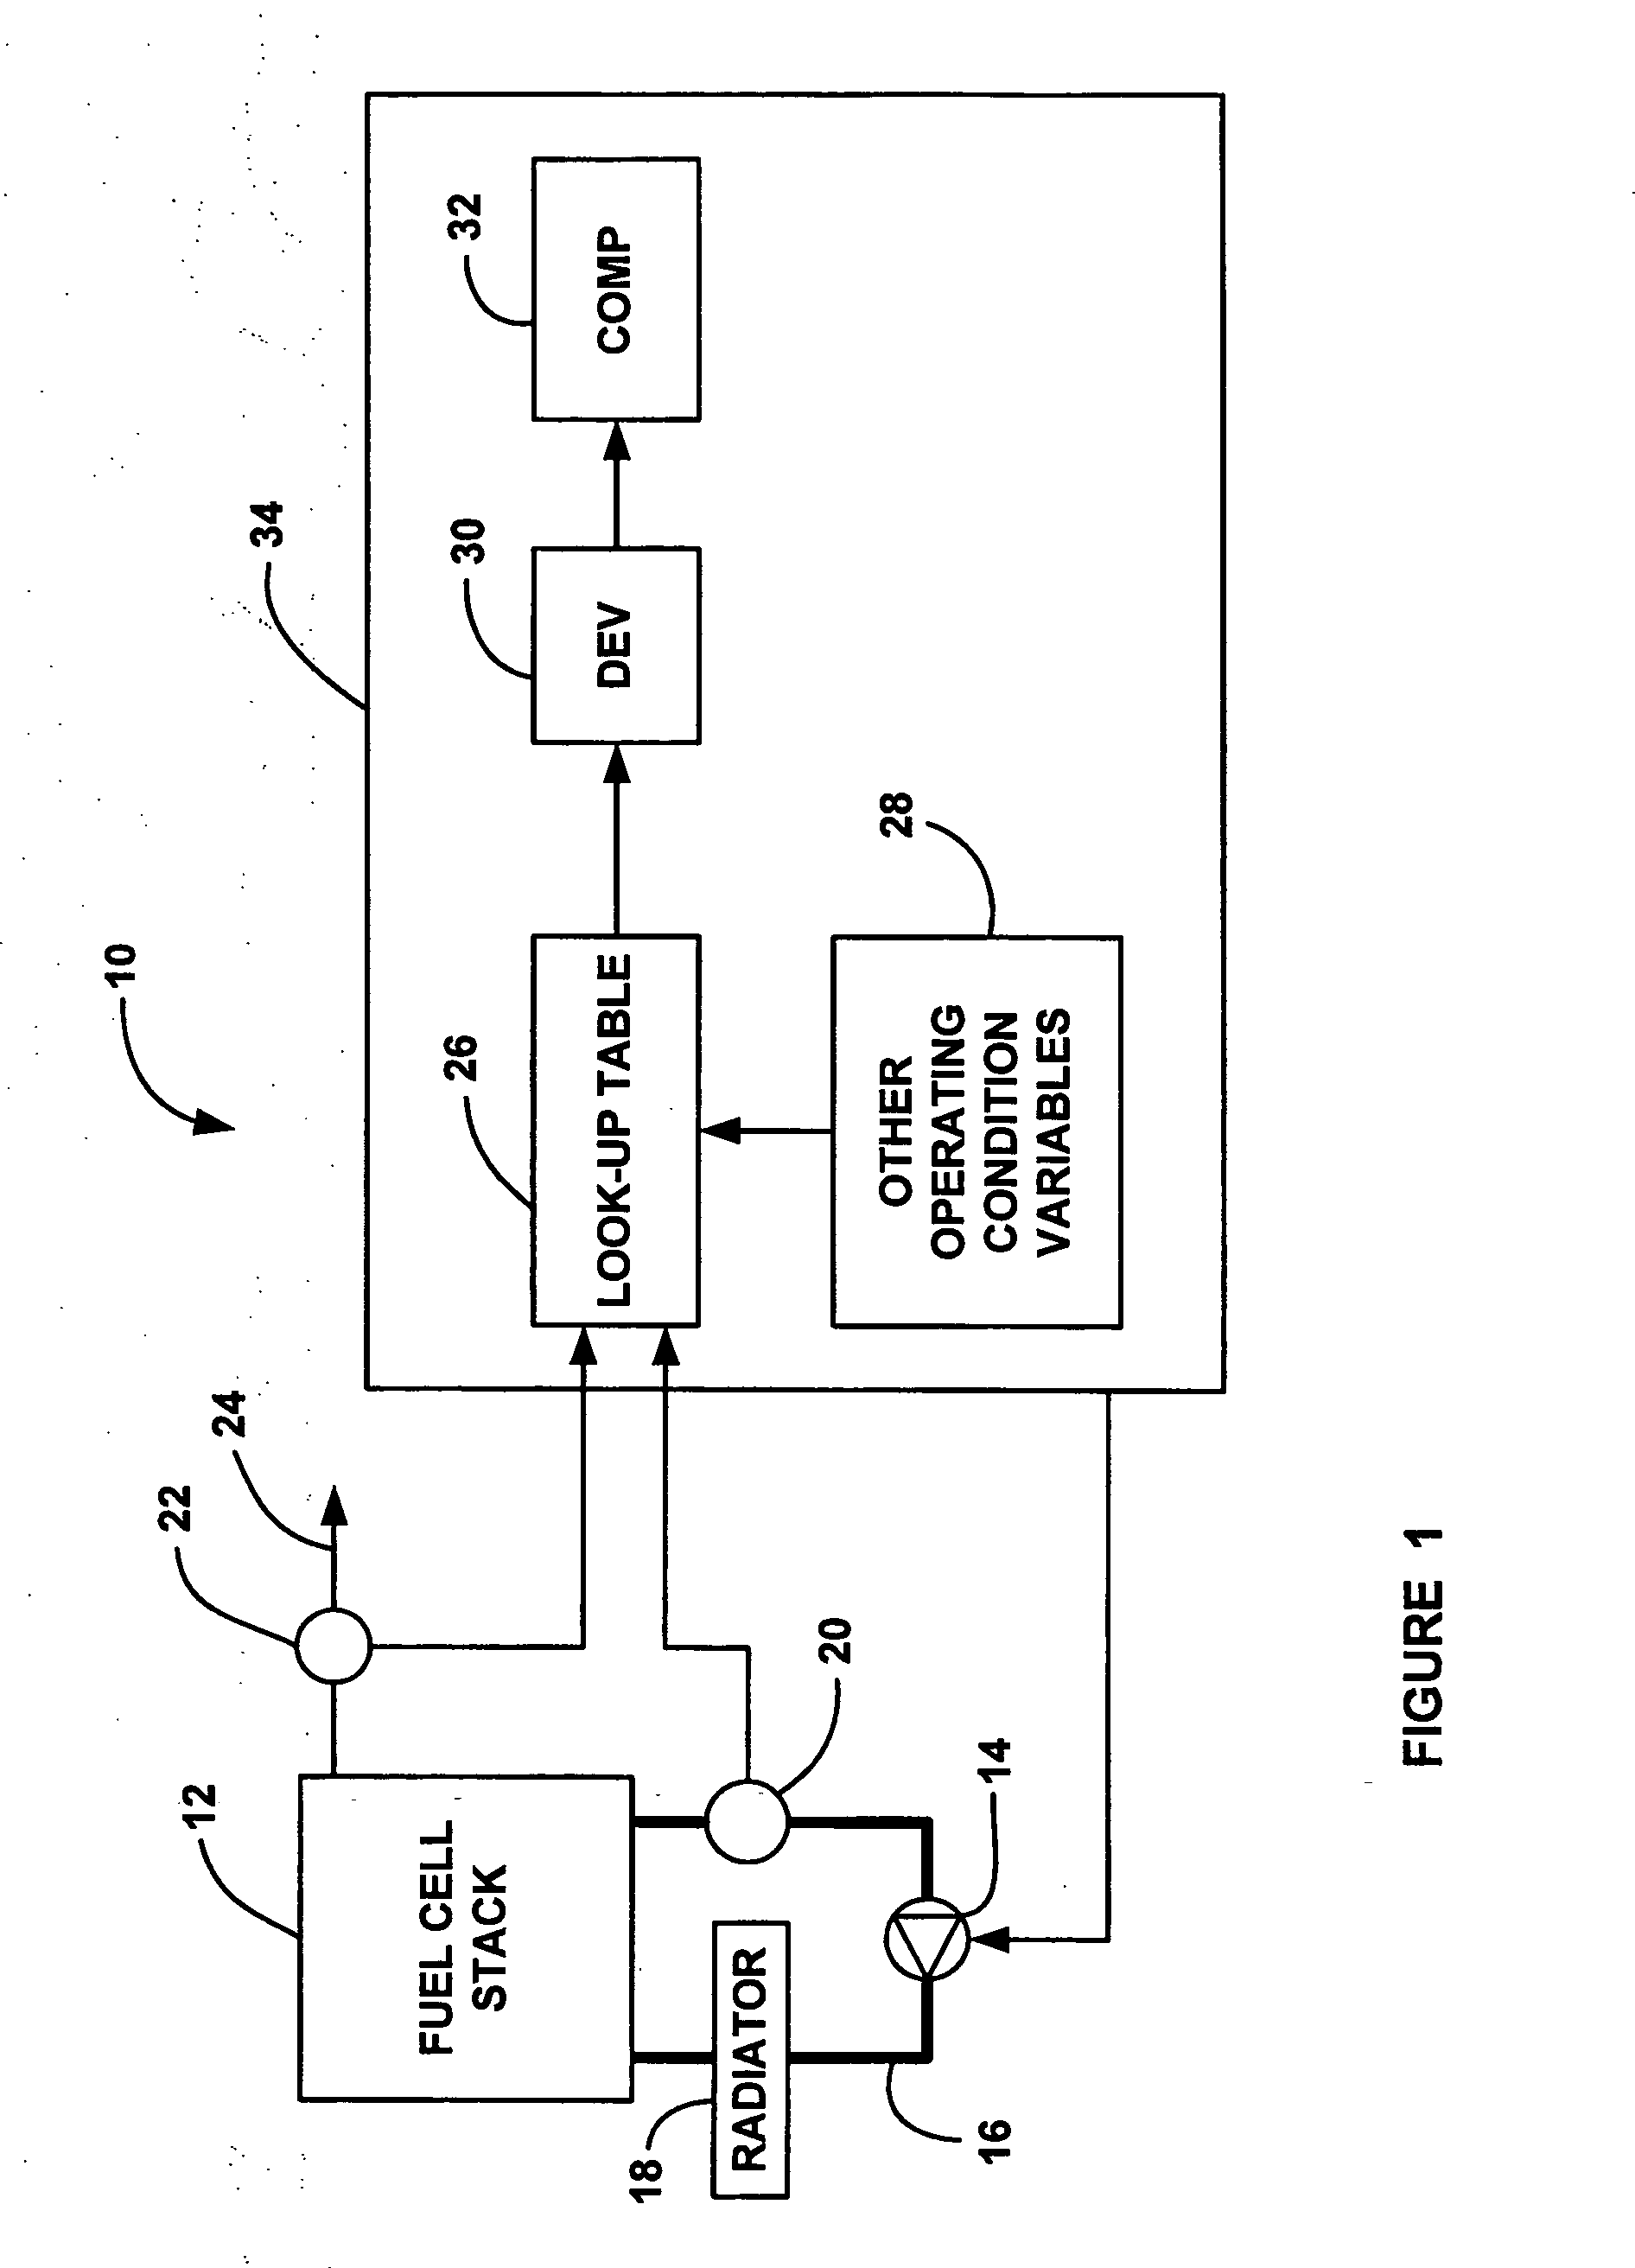 Diagnostic method for detecting a coolant pump failure in a fuel cell system by temperature measurement